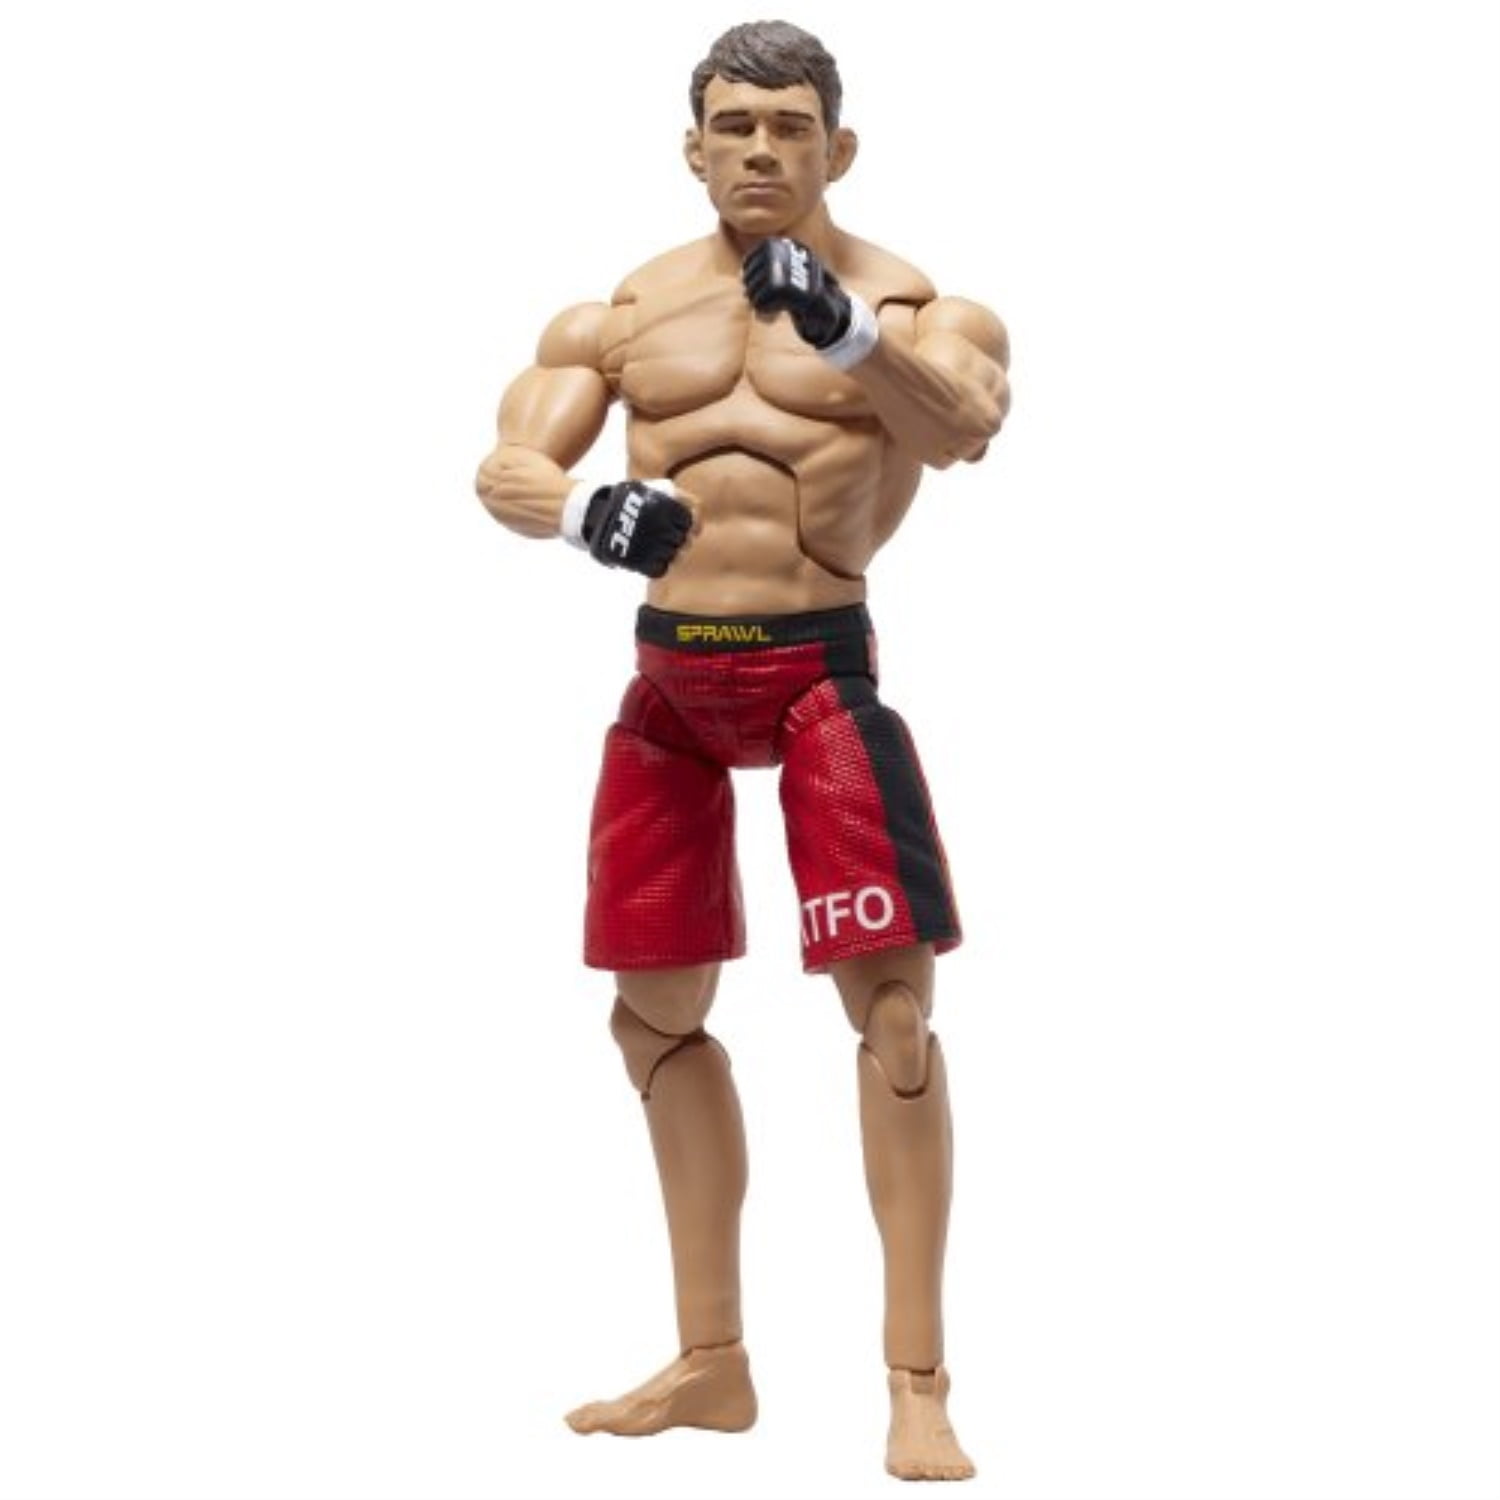 15 Minute Forrest Griffin Workout Plan for Push Pull Legs